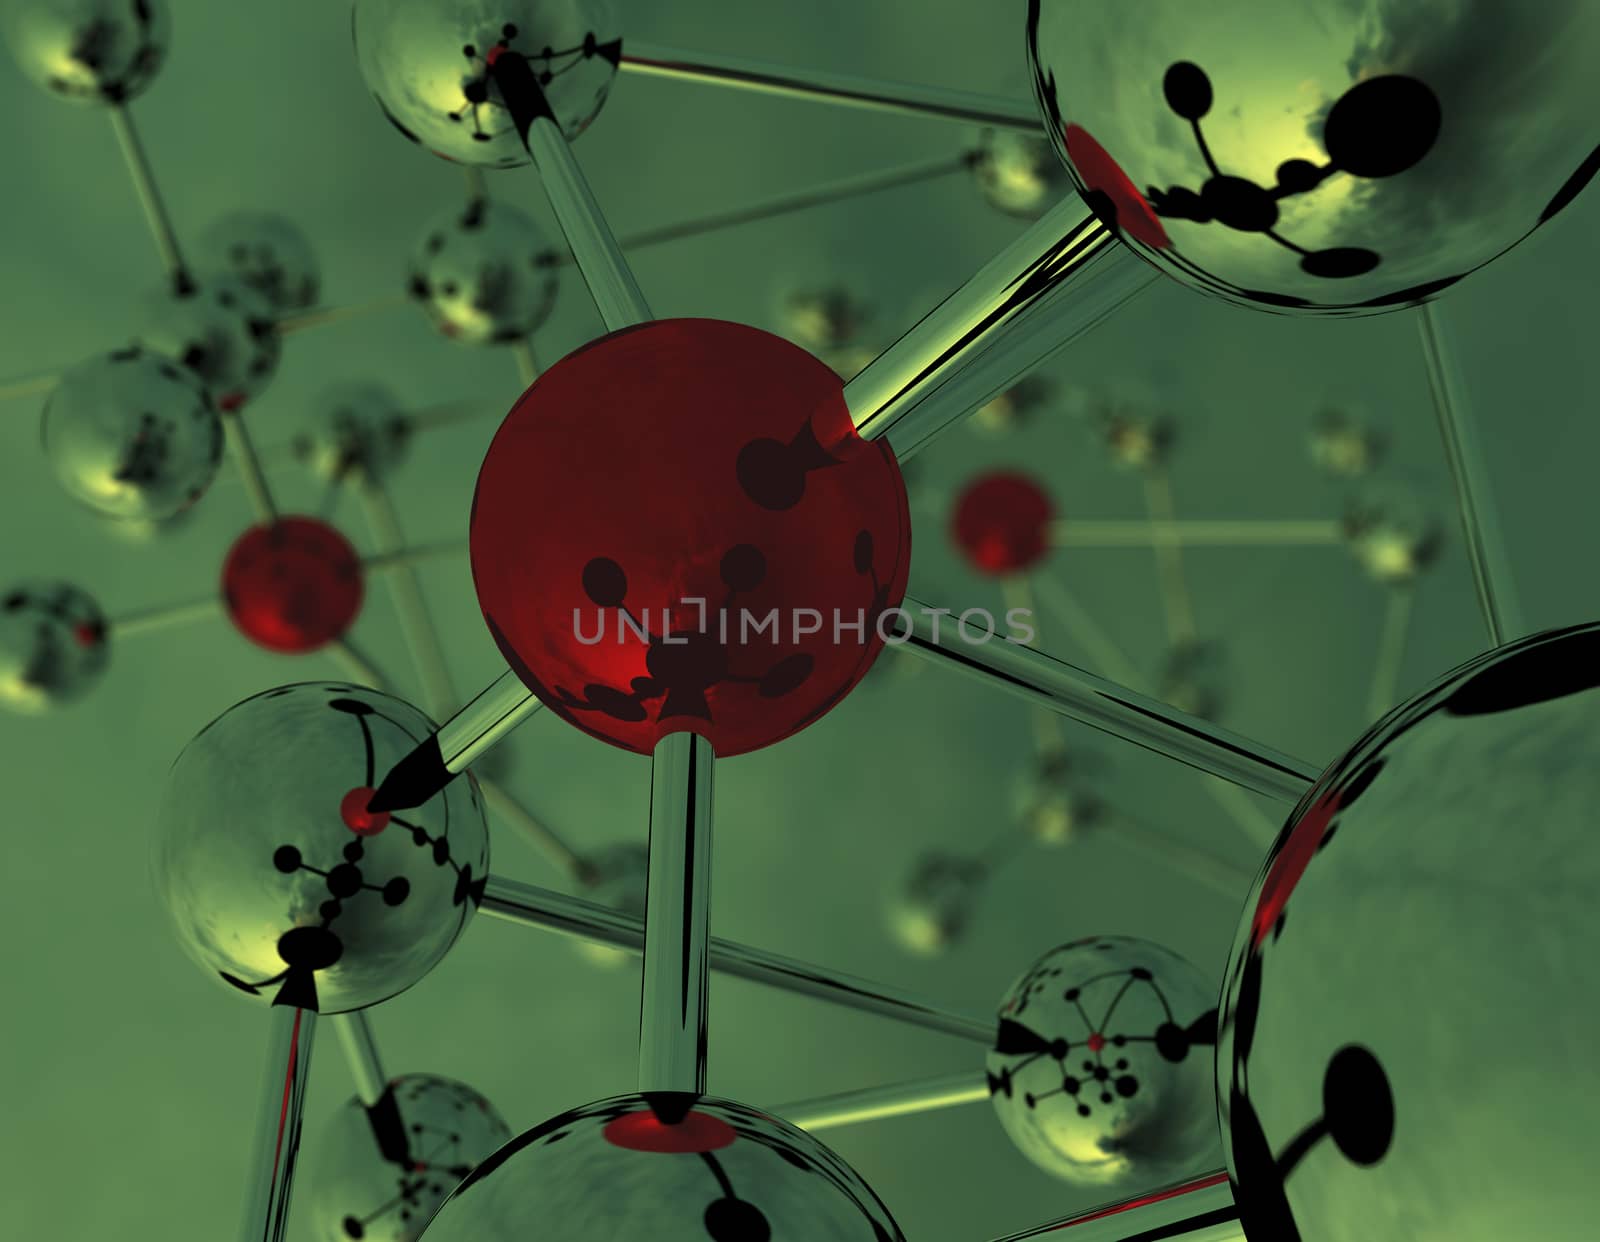 Abstract view of molecules. 3D rendering with raytraced textures.